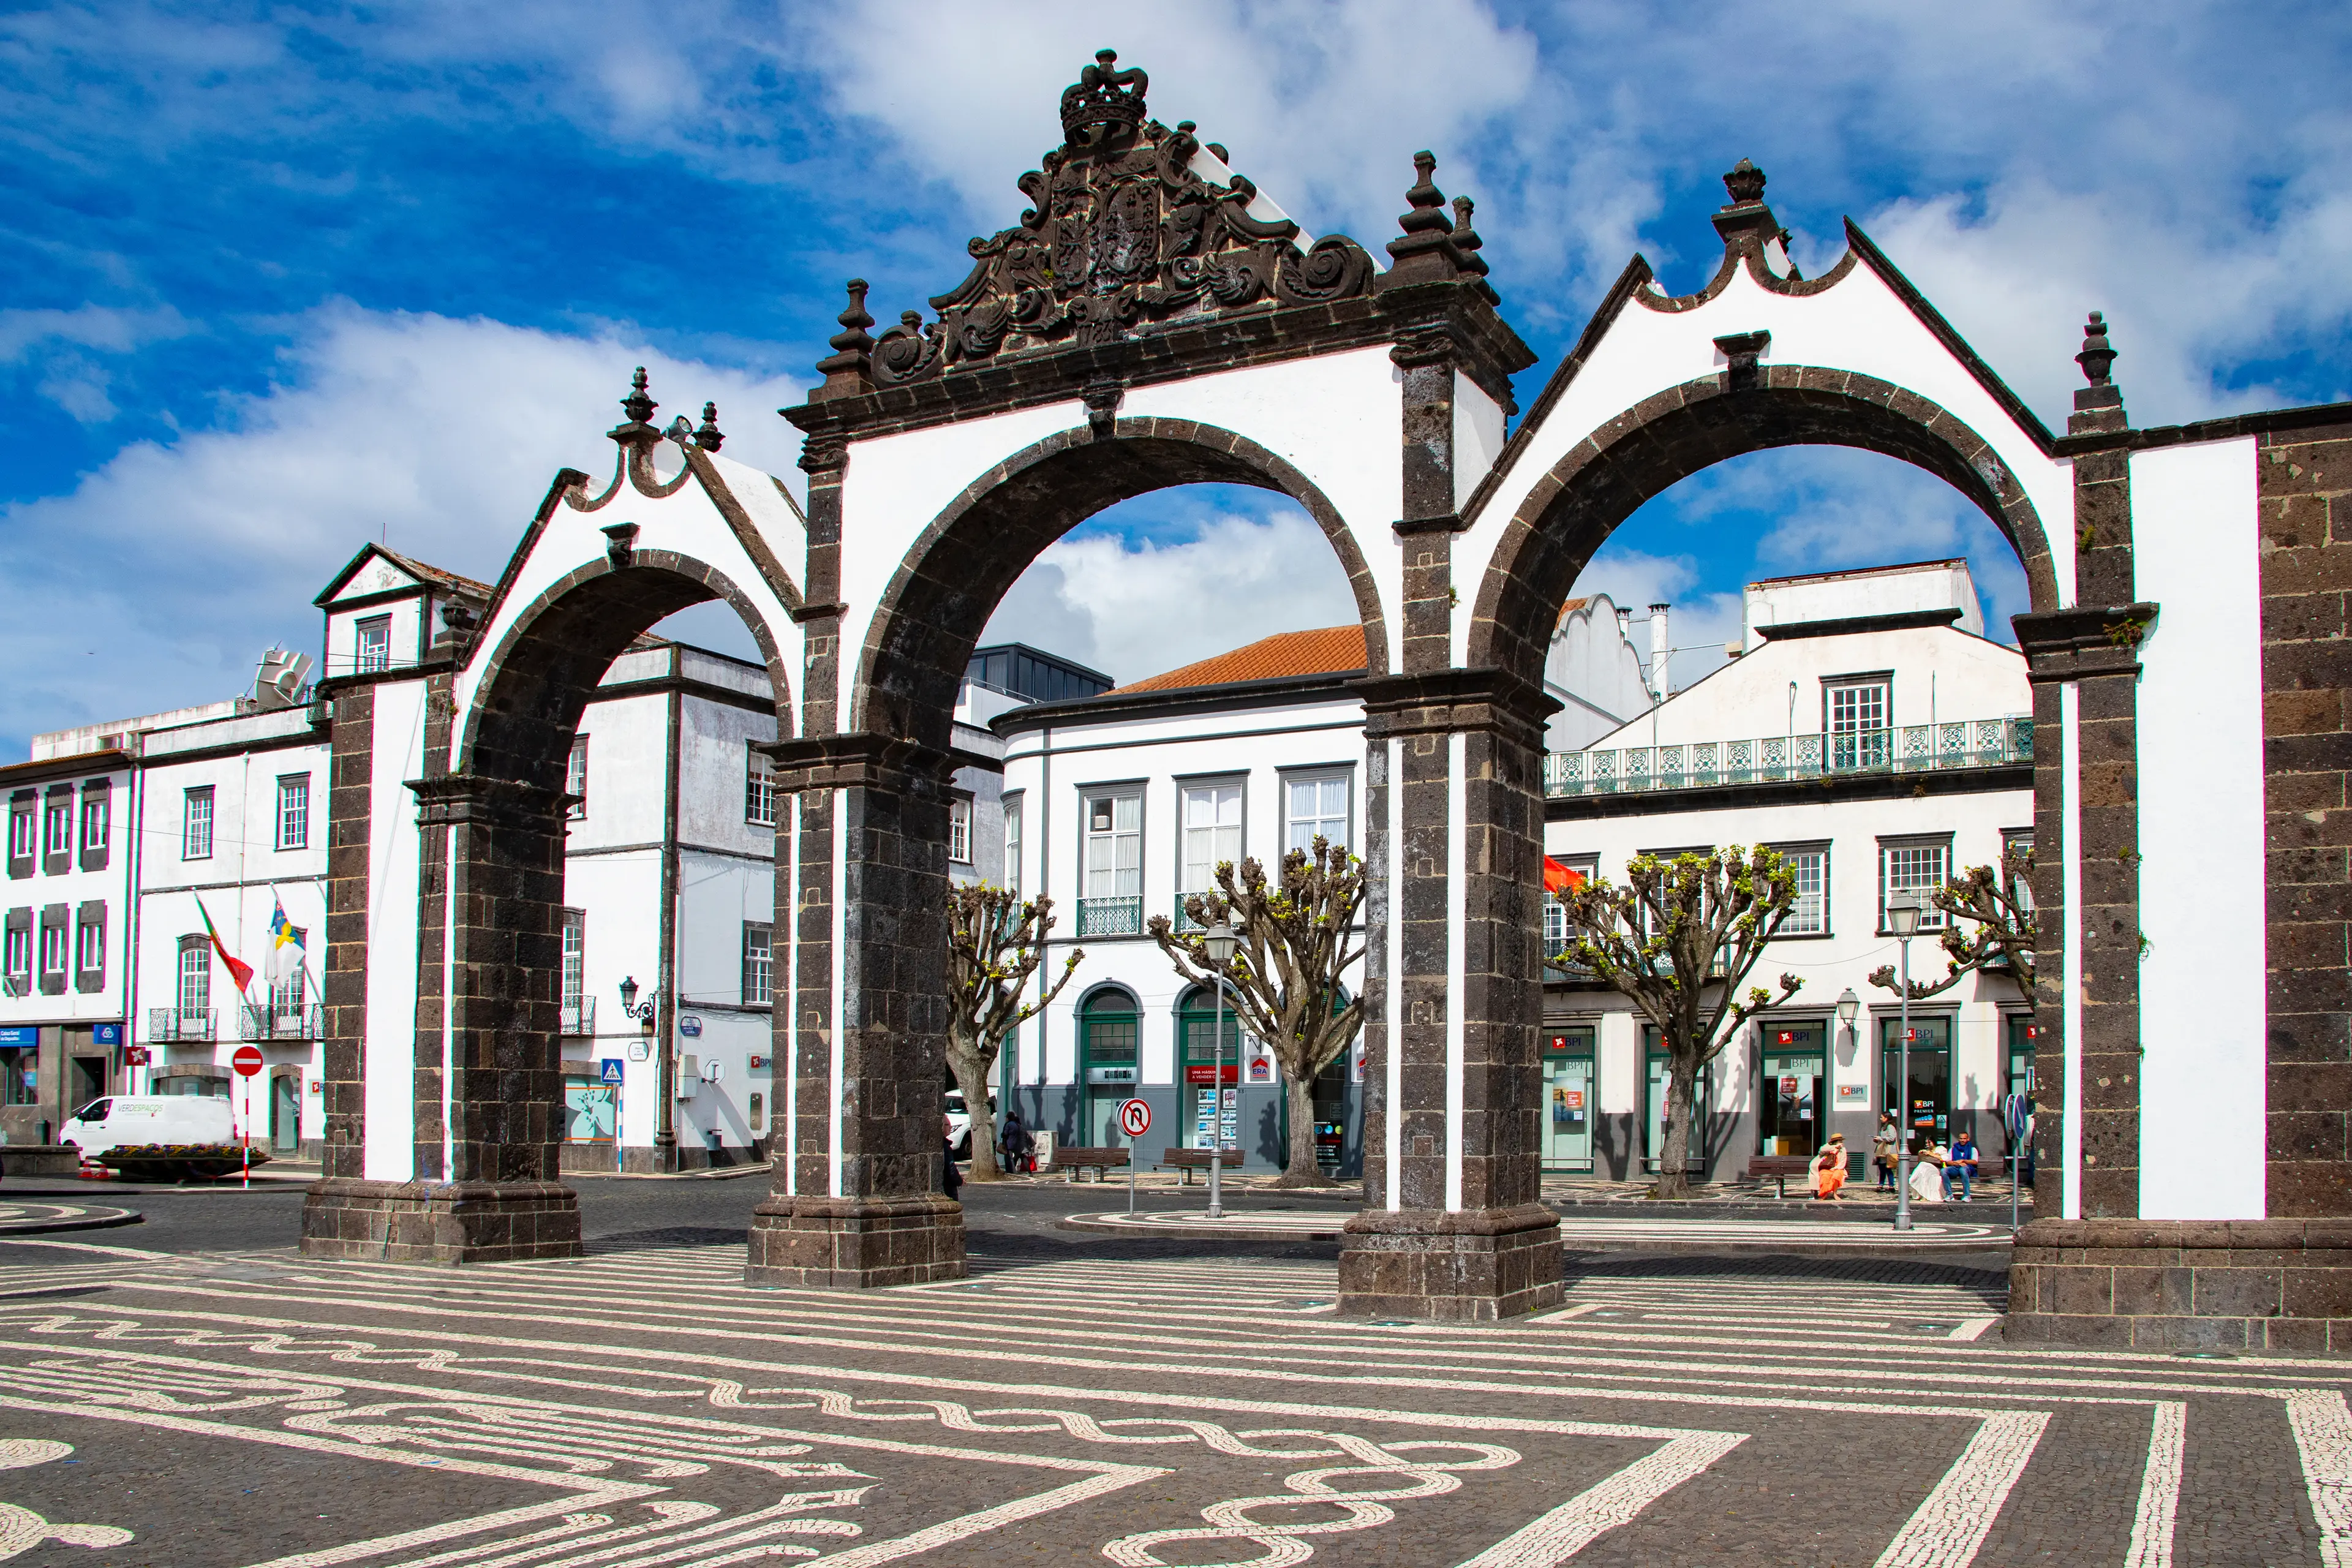 3-Day Outdoor Adventure and Shopping Trip with Friends in Azores